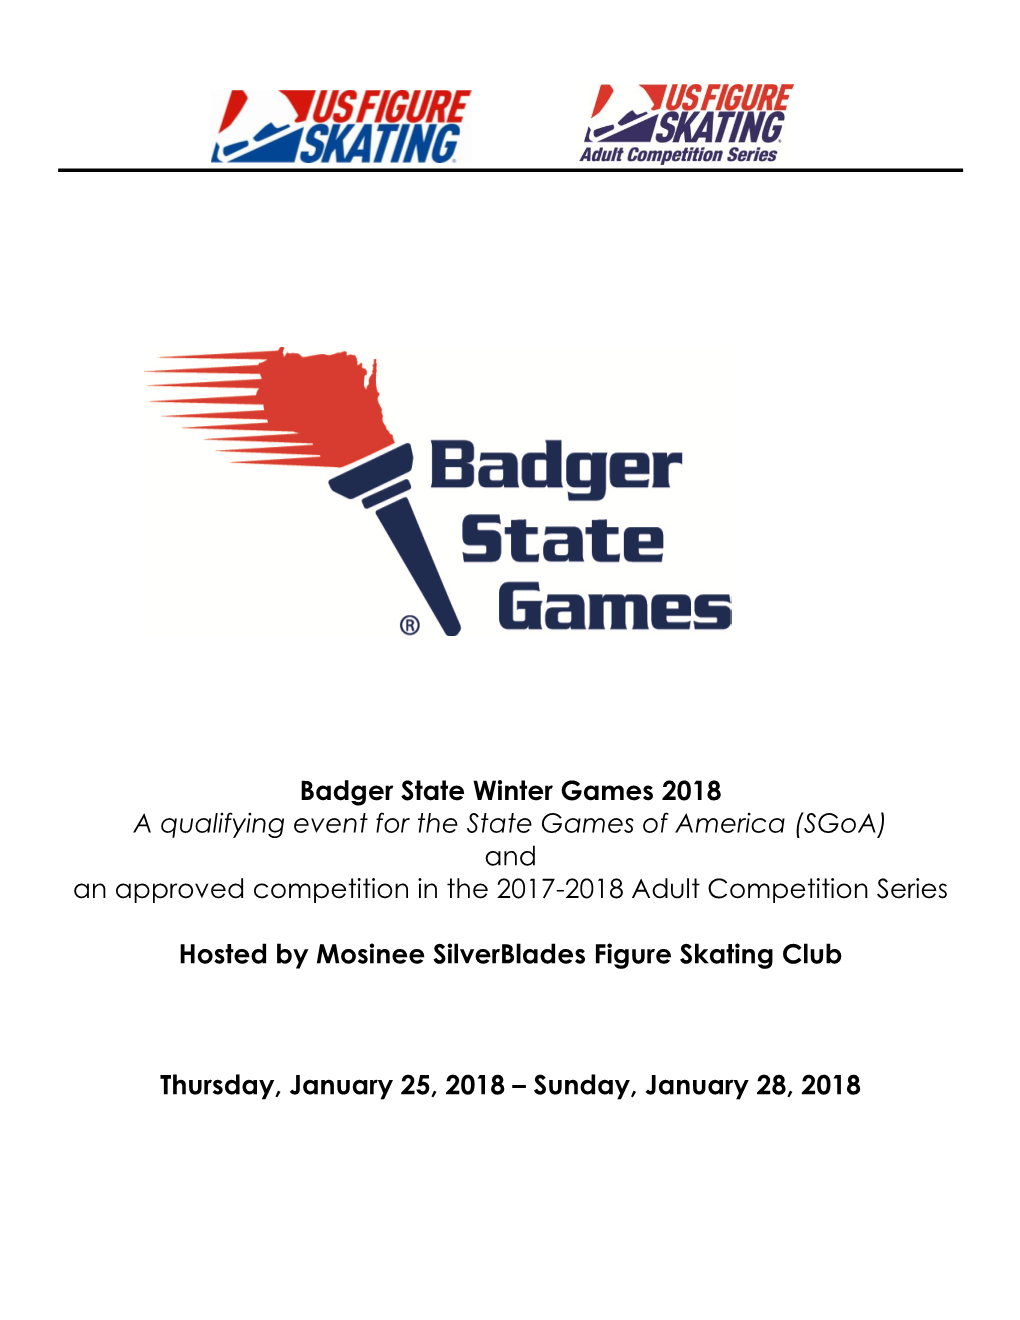 Badger State Winter Games 2018 a Qualifying Event for the State Games of America (Sgoa) and an Approved Competition in the 2017-2018 Adult Competition Series